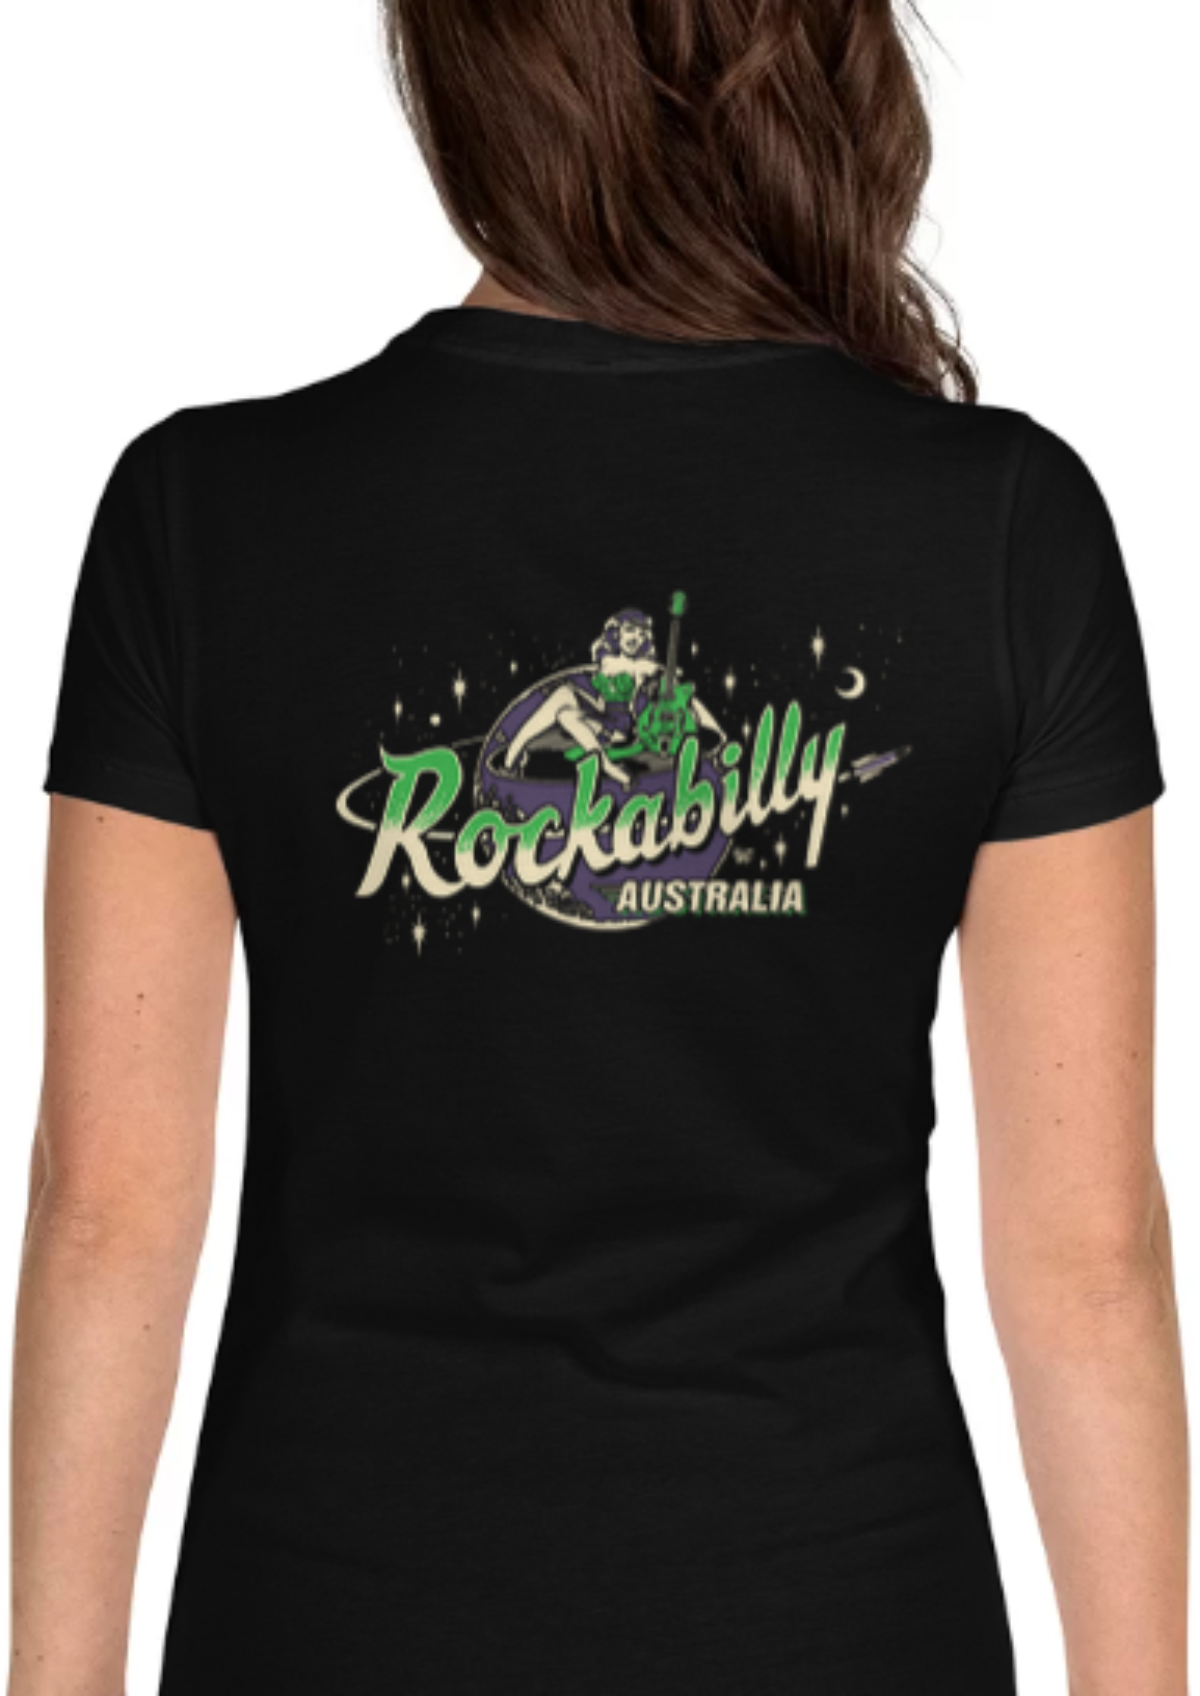 Show off your love for rockabilly and look great in one of our super comfortable 100% cotton "Rockabilly Australia" printed ladies crew shirts! Available in sizes 6 to 20  and in mens sizes Small to 3XL from rockabillyaustralia.com!